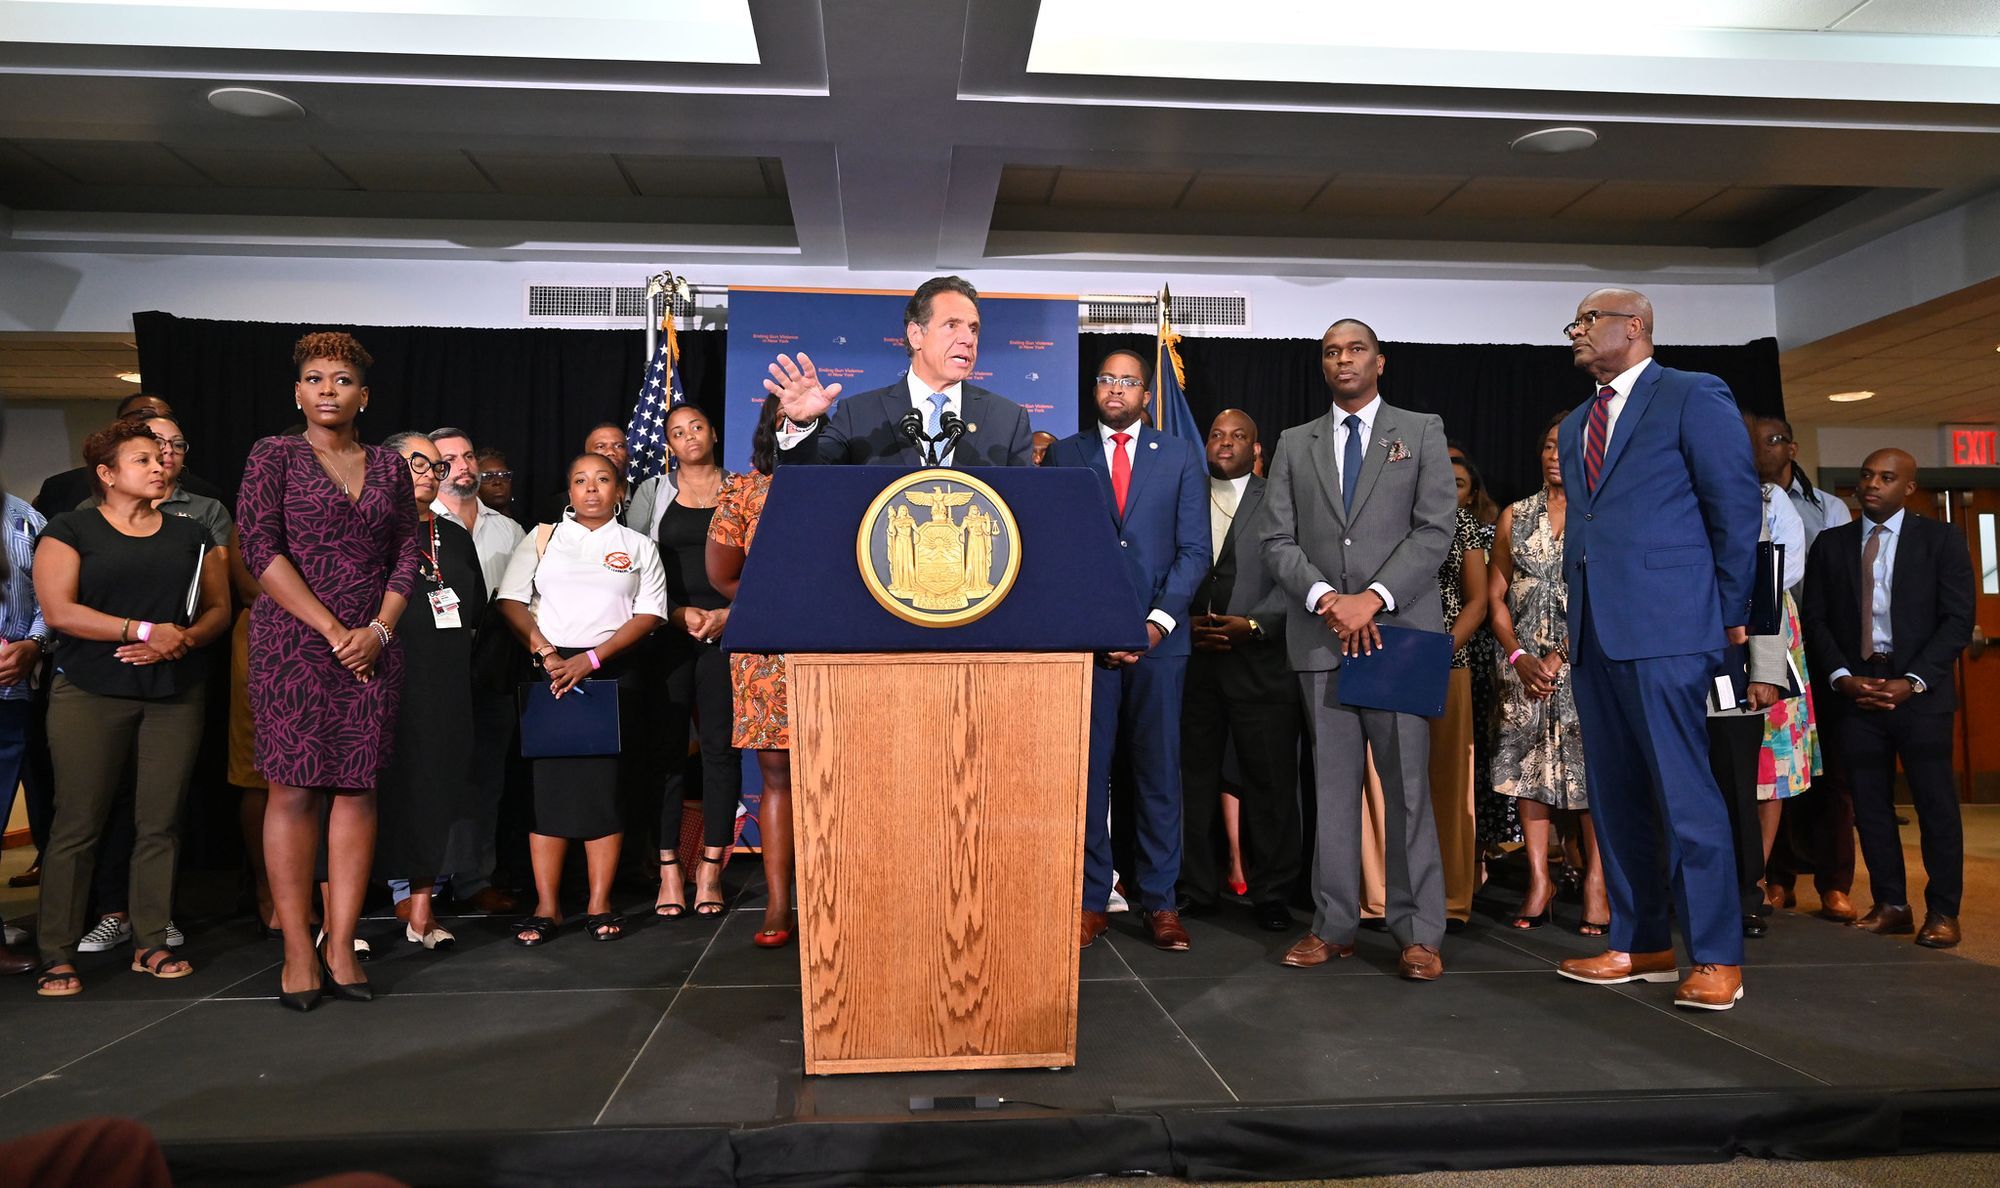 Cuomo Announces Plan for 4,000 Youth Jobs in Gun Violence Hot Spots